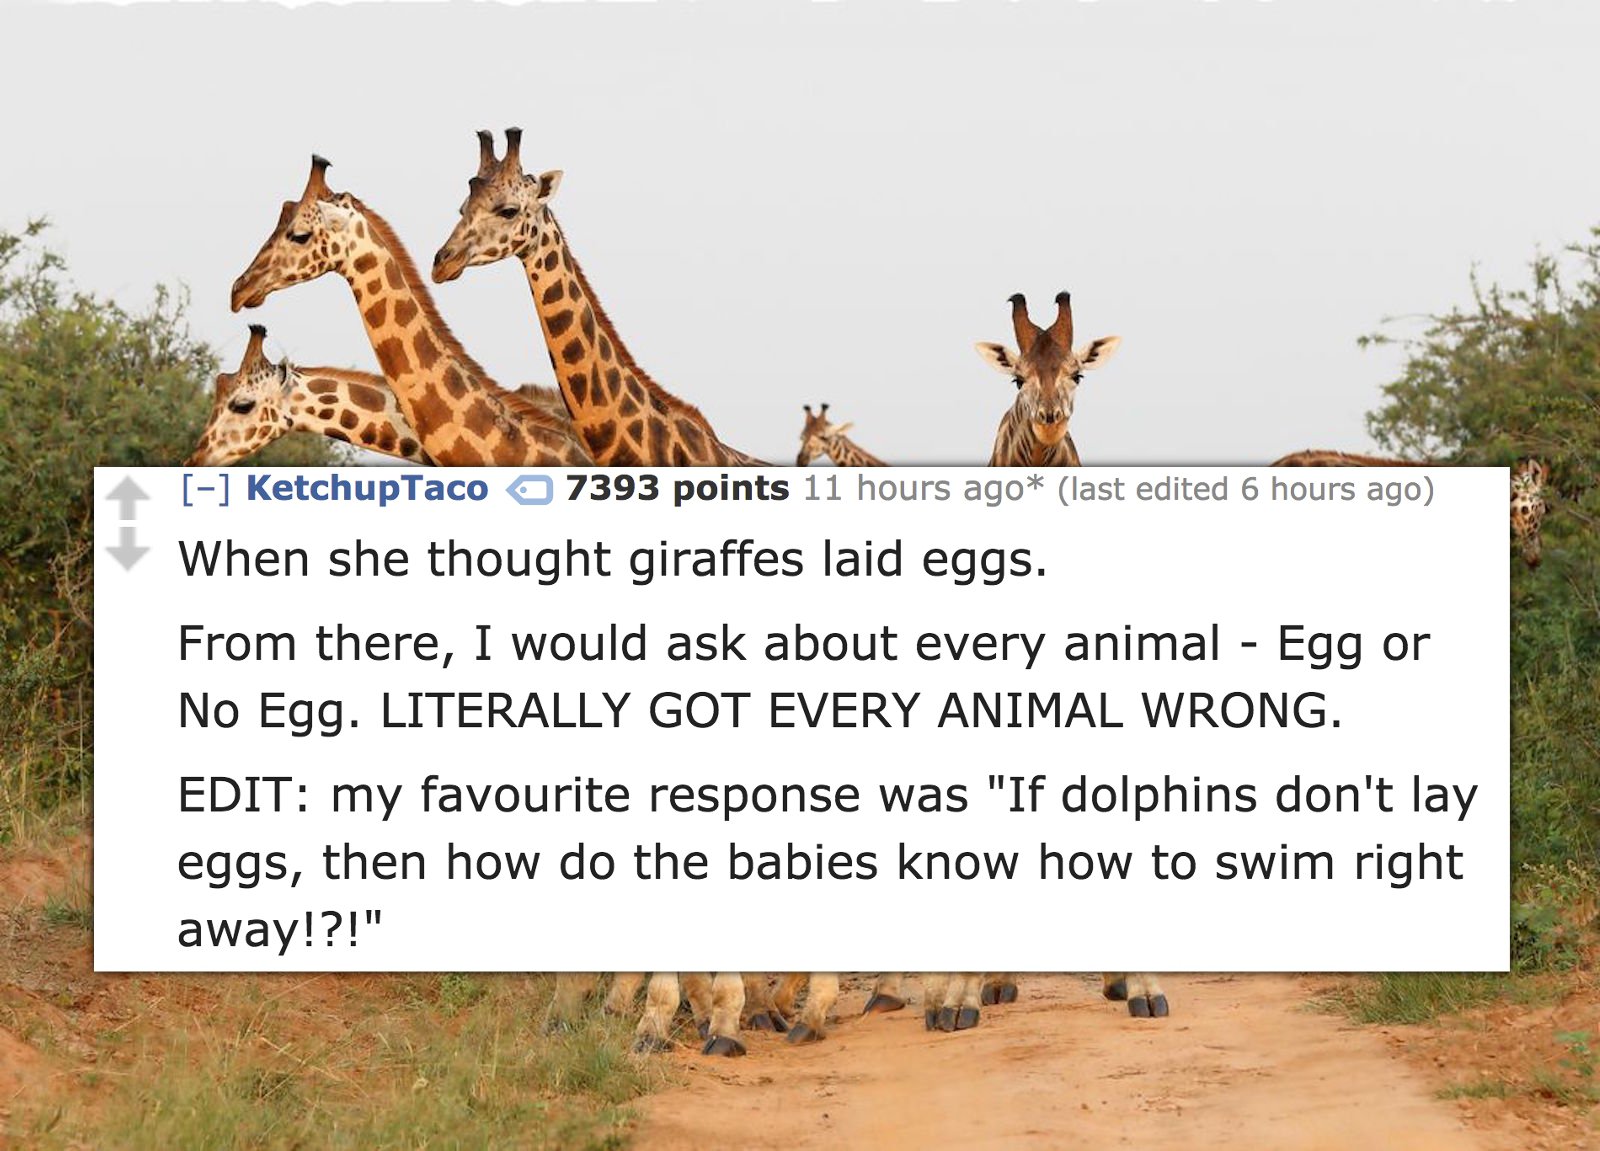 giraffe - KetchupTaco 7393 points 11 hours ago last edited 6 hours ago When she thought giraffes laid eggs. From there, I would ask about every animal Egg or No Egg. Literally Got Every Animal Wrong. Edit my favourite response was "If dolphins don't lay e